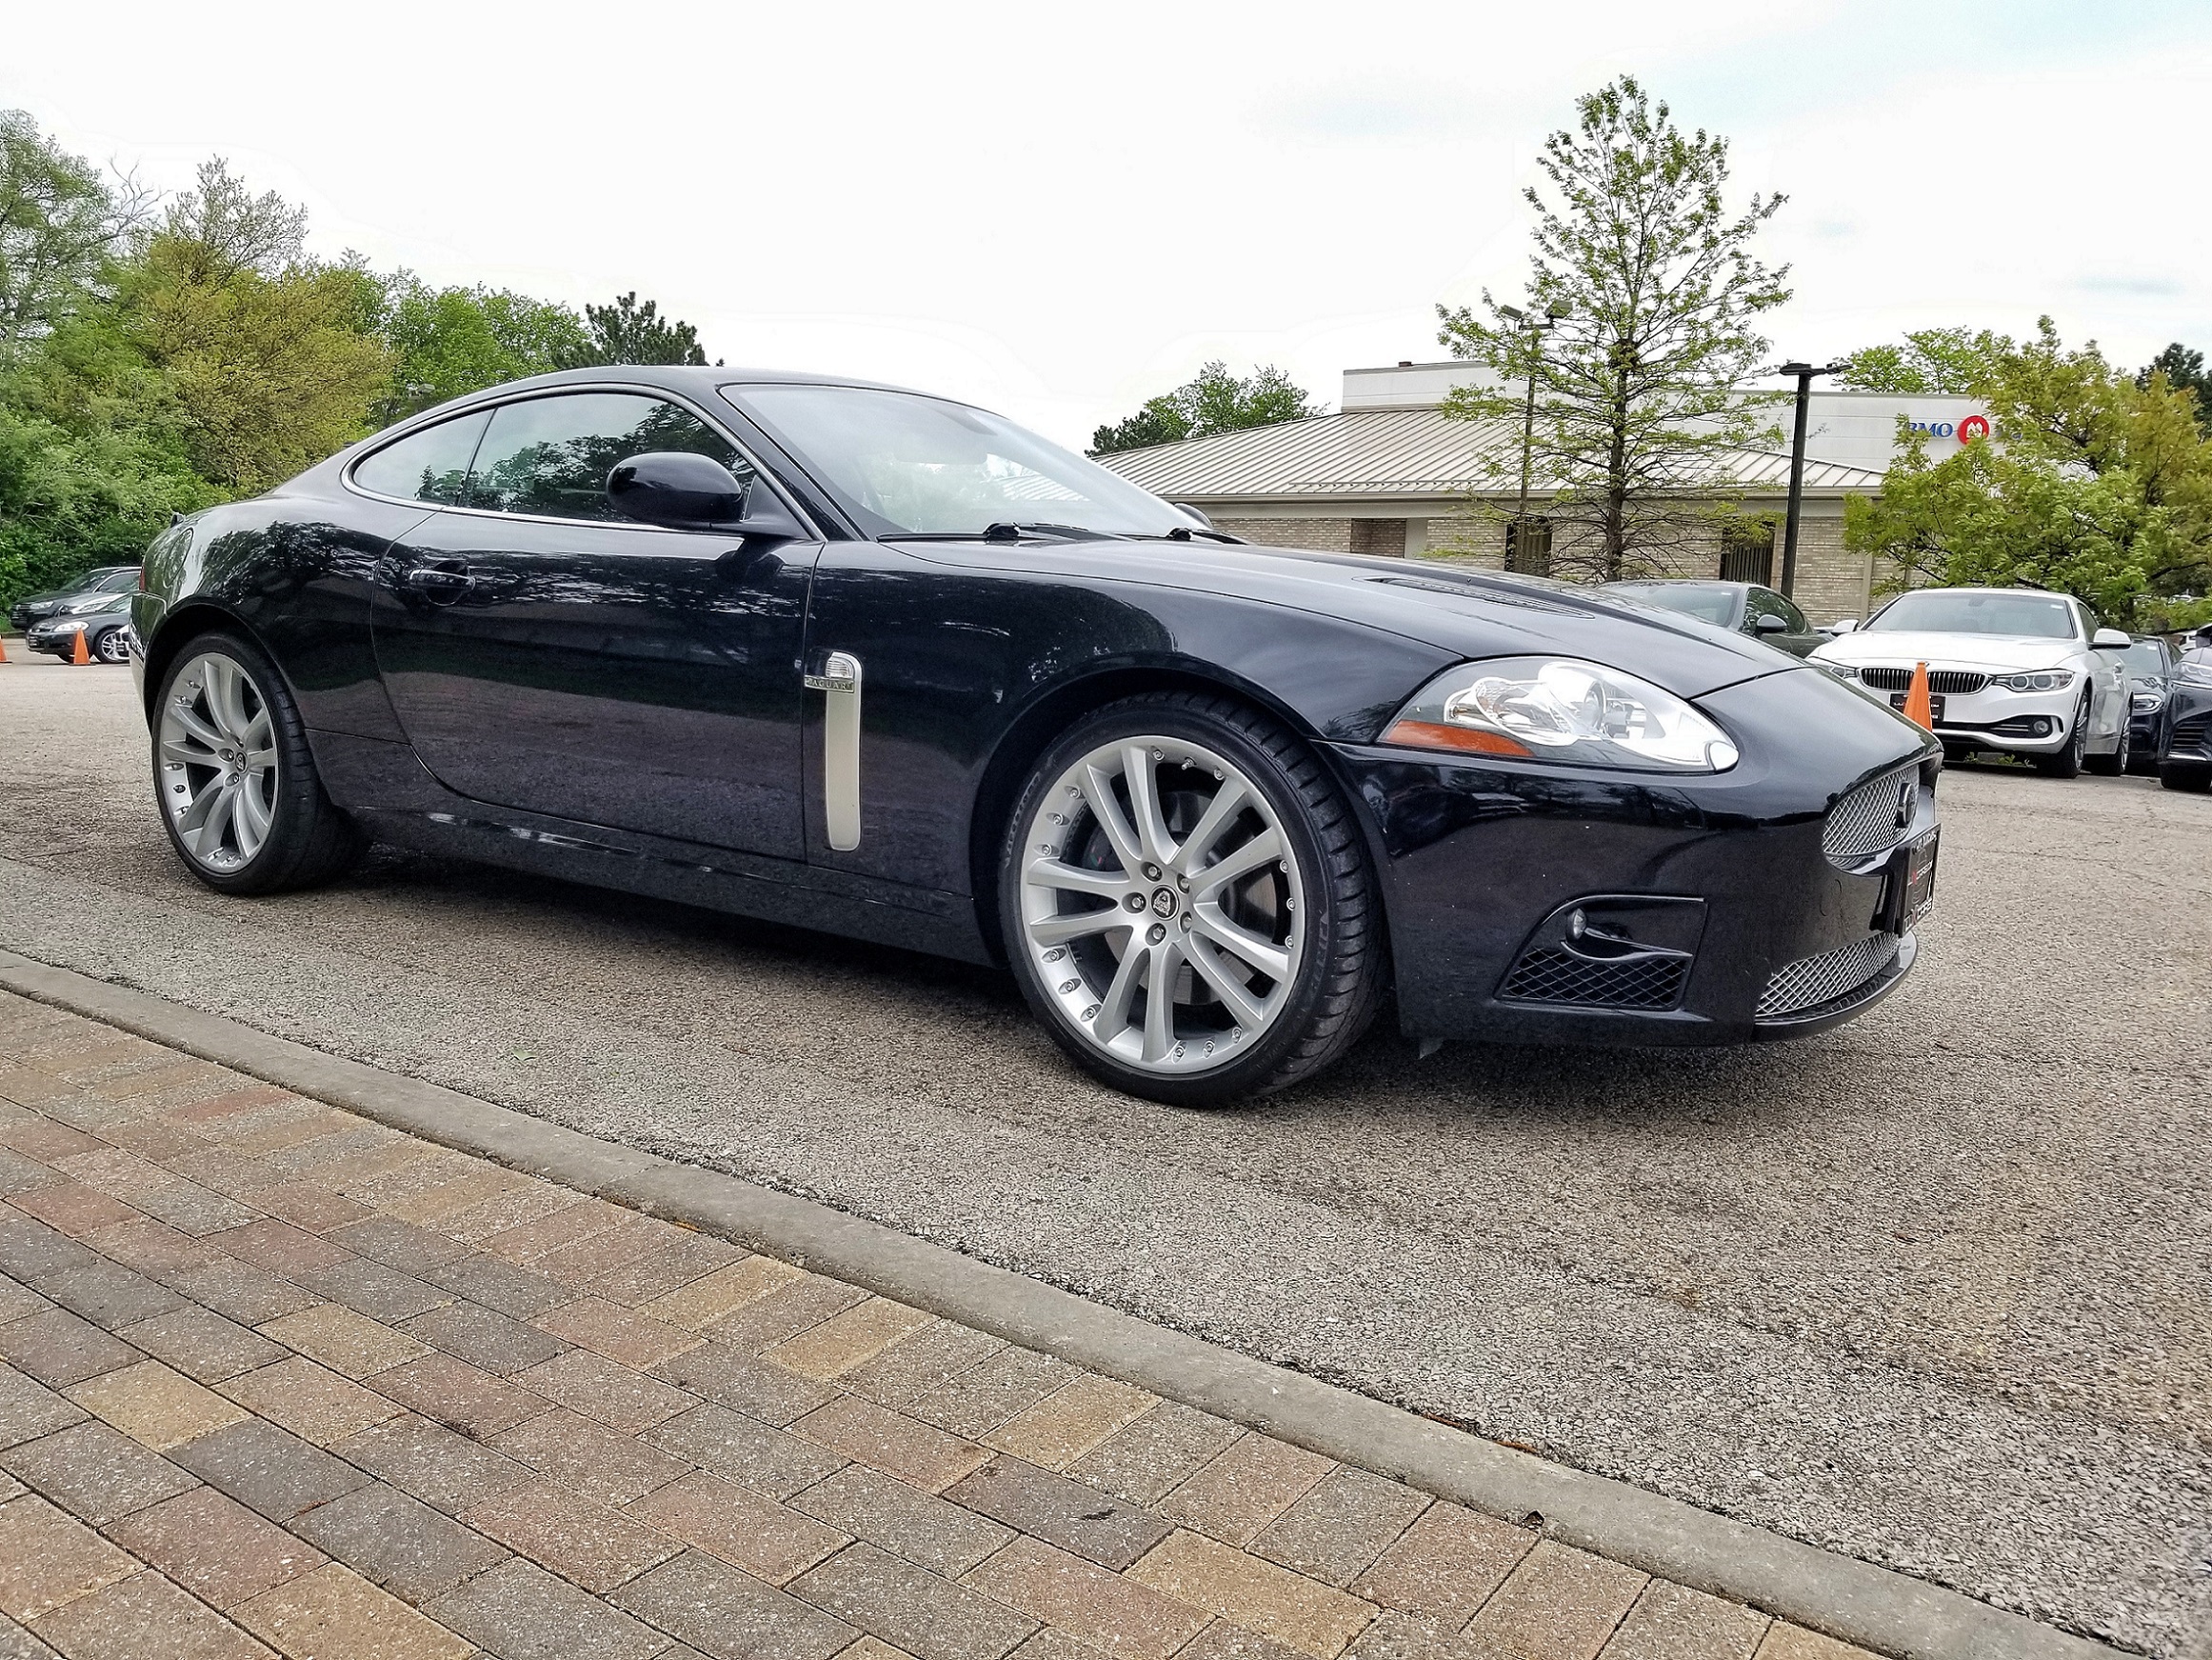 A black used 2007 Jaguar XKR Coupe in a used car dealership parking lot